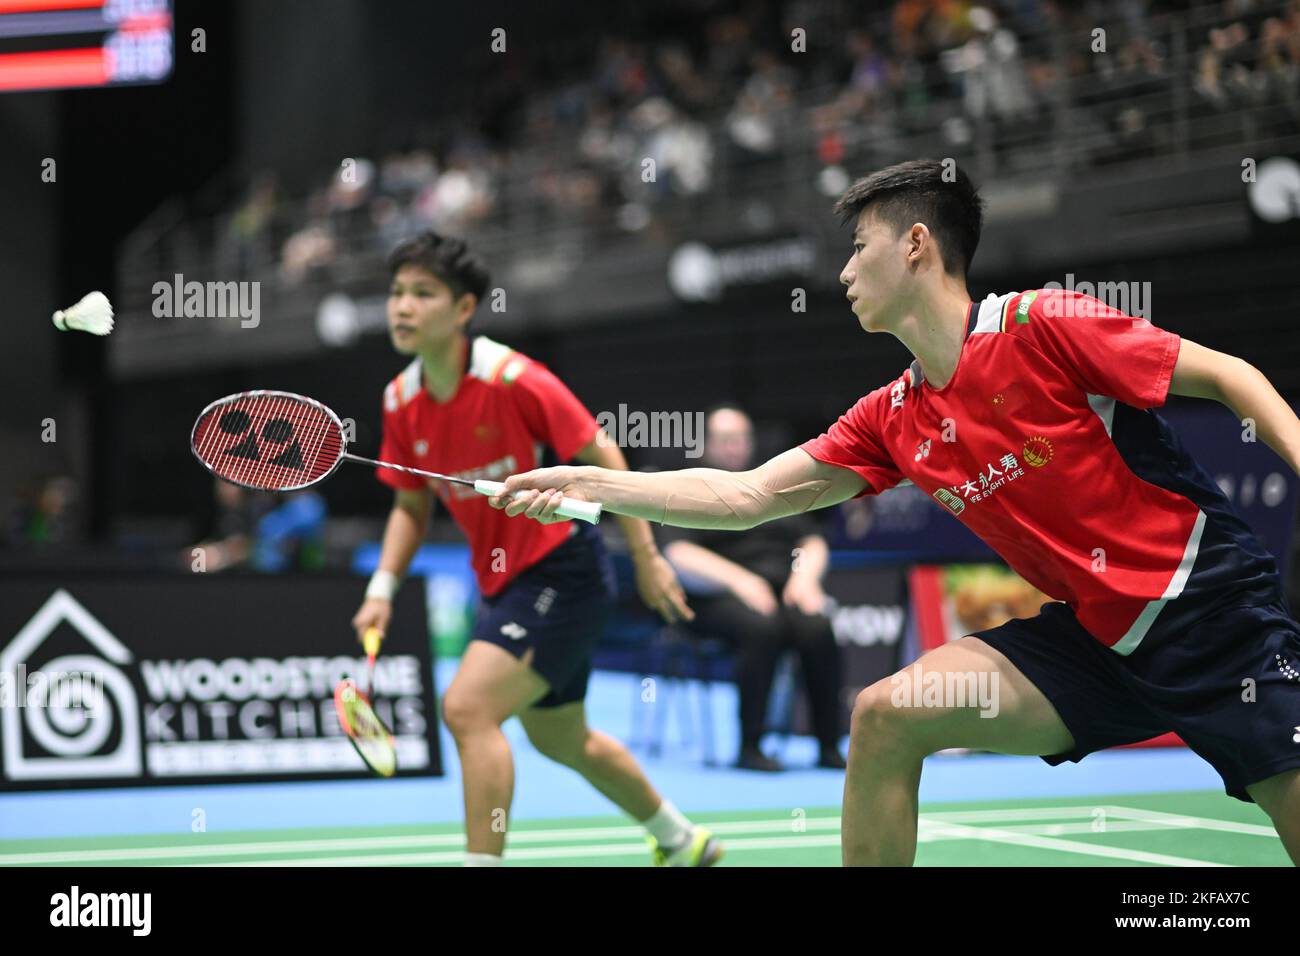 Sydney, Australia. 17th Nov, 2022. Huang Dong Ping (L) and Feng Yan Zhe (R) of China seen during the 2022 SATHIO GROUP Australian Badminton Open mixed double round of 16 match against Young Hyuk Kim and Lee Yu Lim of Korea. Feng and Huang won the match 12-21, 21-14, 21-15. (Photo by Luis Veniegra/SOPA Images/Sipa USA) Credit: Sipa USA/Alamy Live News Stock Photo